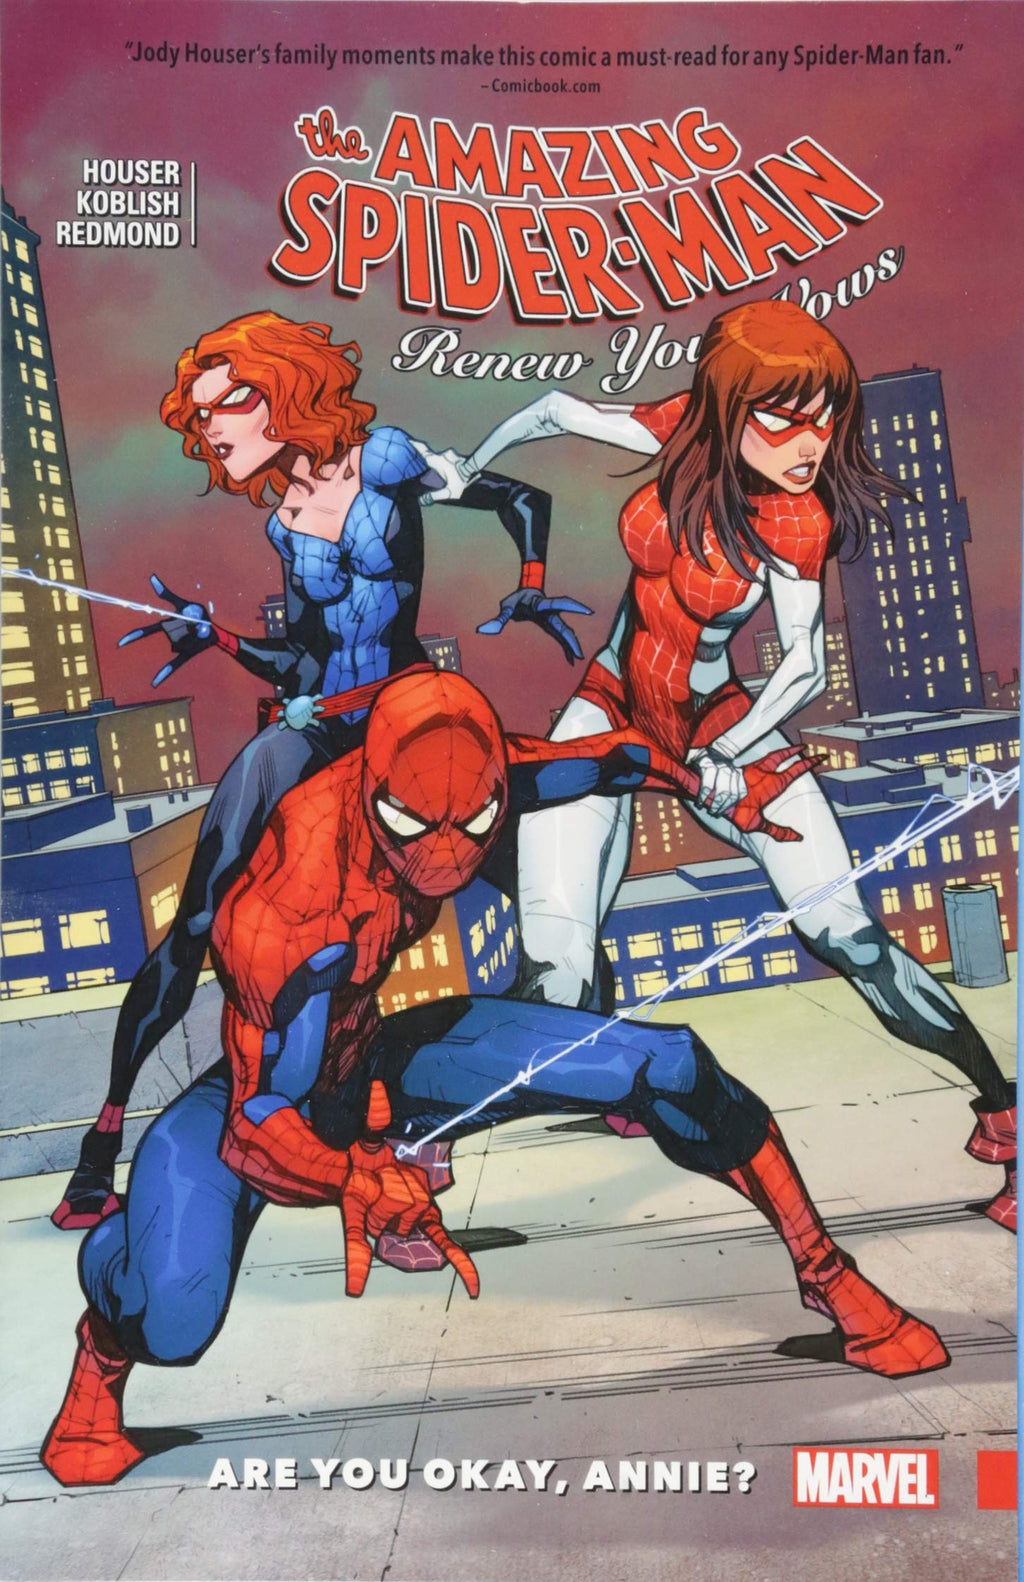 The Amazing Spider-Man : Renew Your Vows Volume 4 Are You Okay, Annie? - The Comic Warehouse